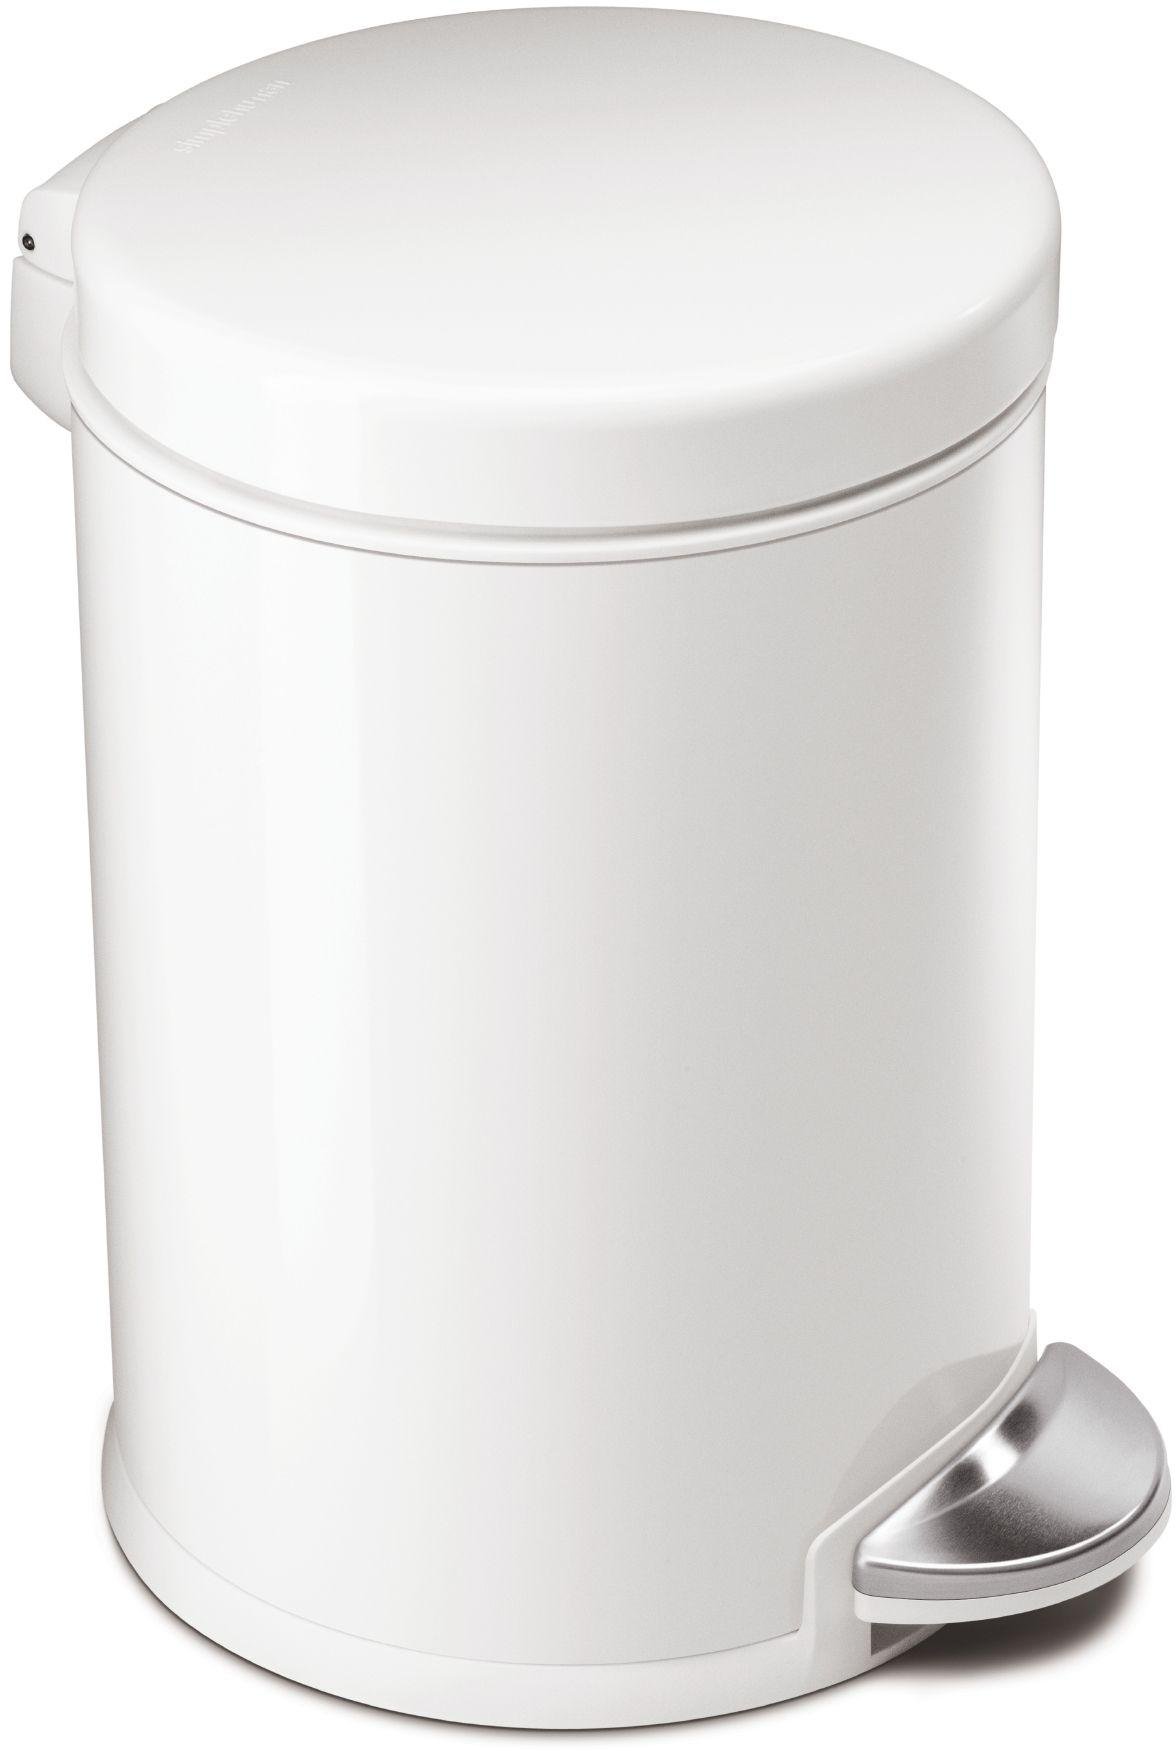 simplehuman 4.5 Litre Round Pedal Bin - Stainless Steel